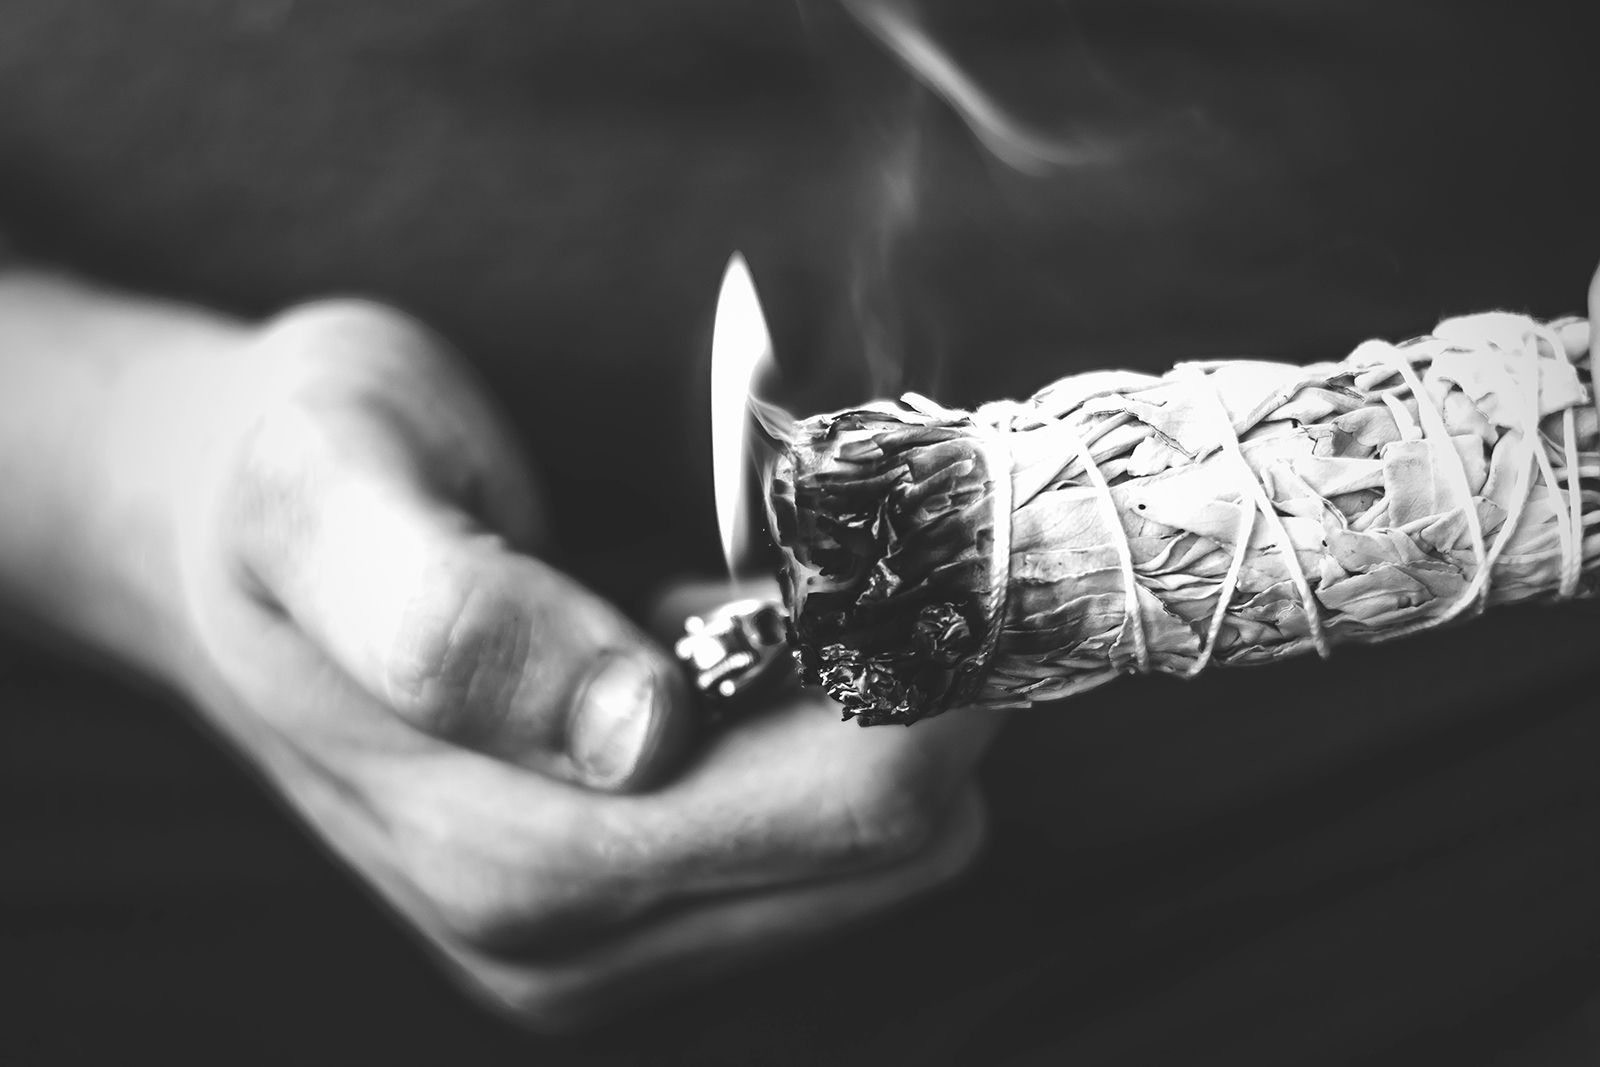 Bundled white sage is burned. Photo by Brittany Colette/Unsplash/Creative Commons